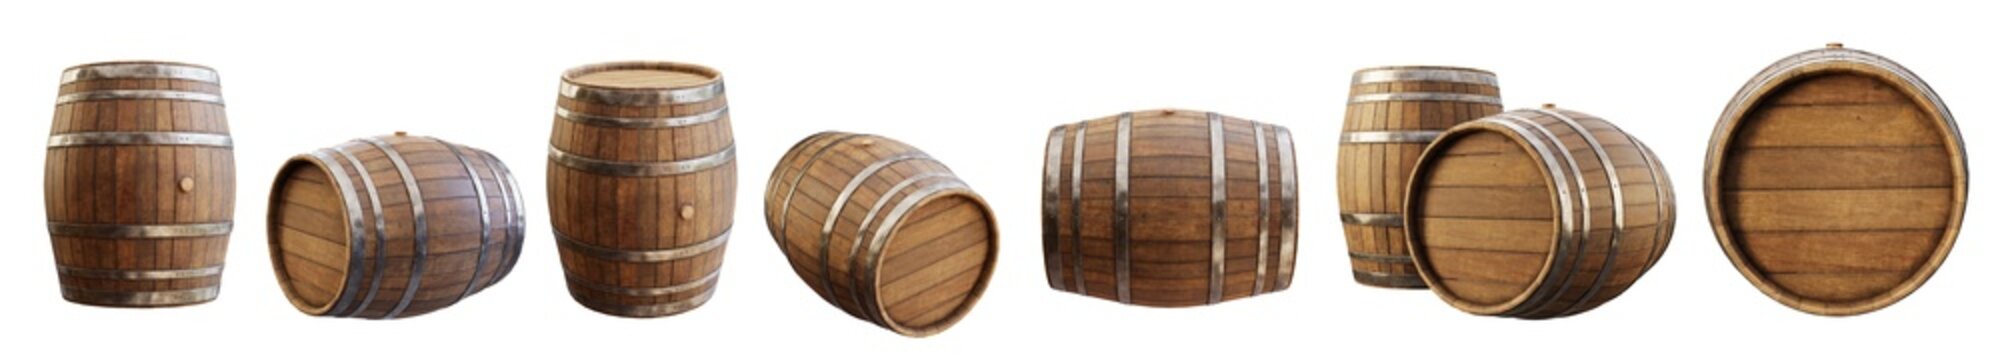 wooden barrel, view from different angles, isolated on transparent background. clipping path indlude